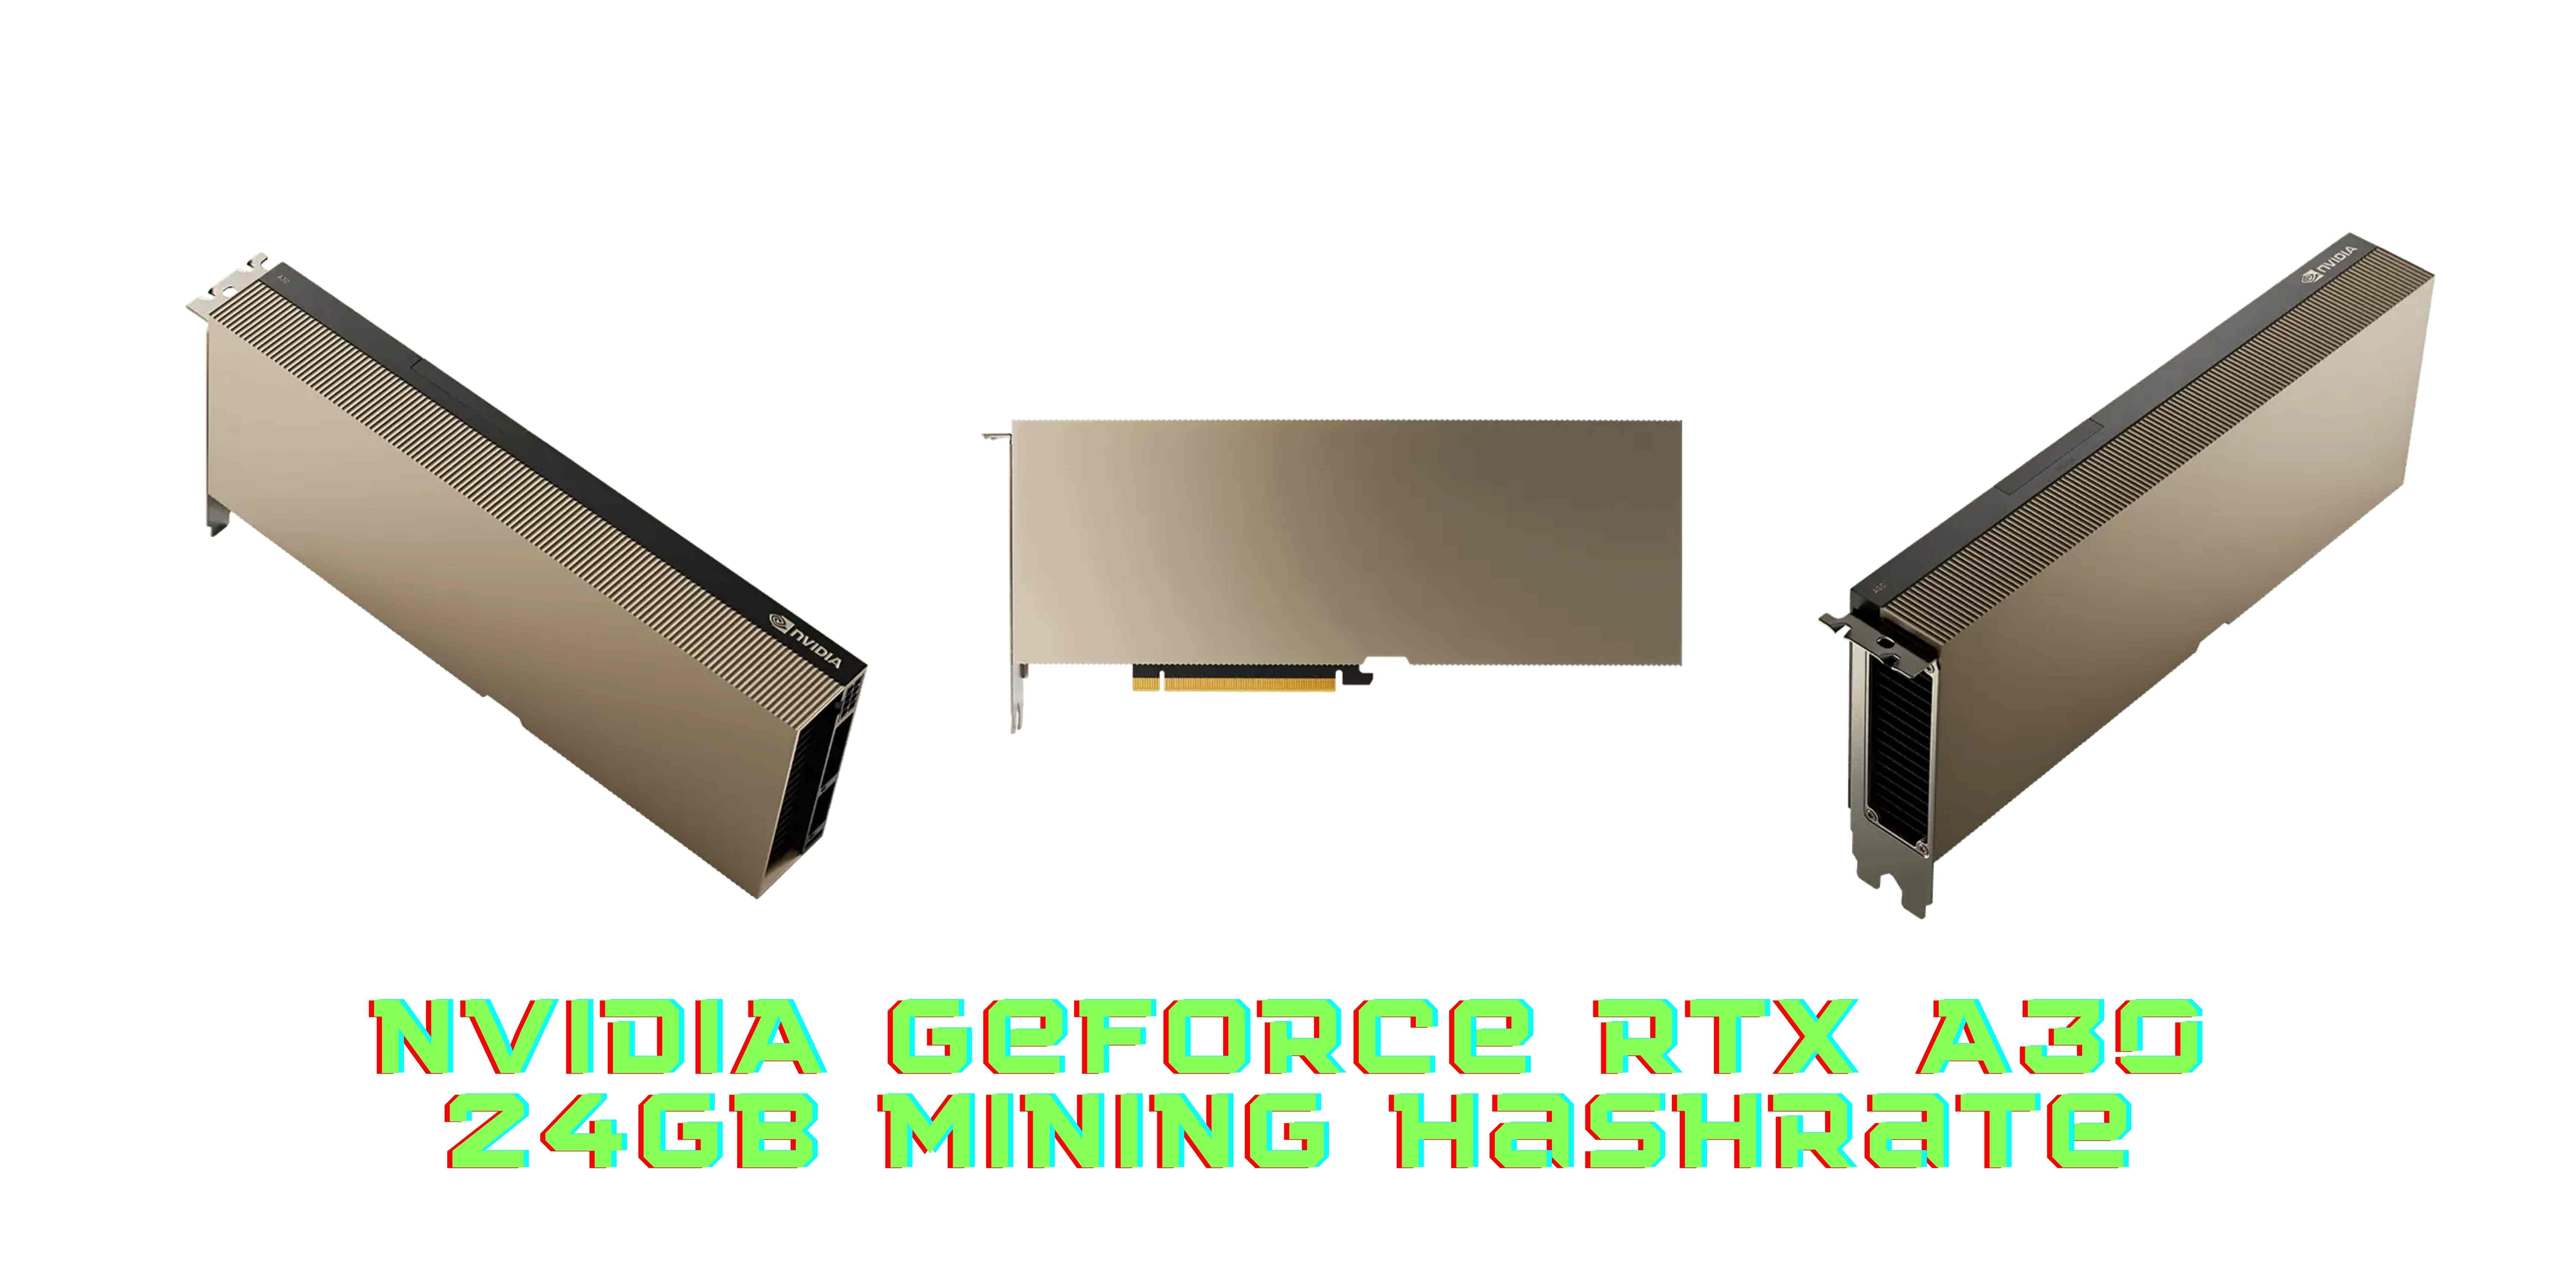 The NVIDIA RTX A30 24GB Mining Hashrate Has Provided You With An Exciting Experience